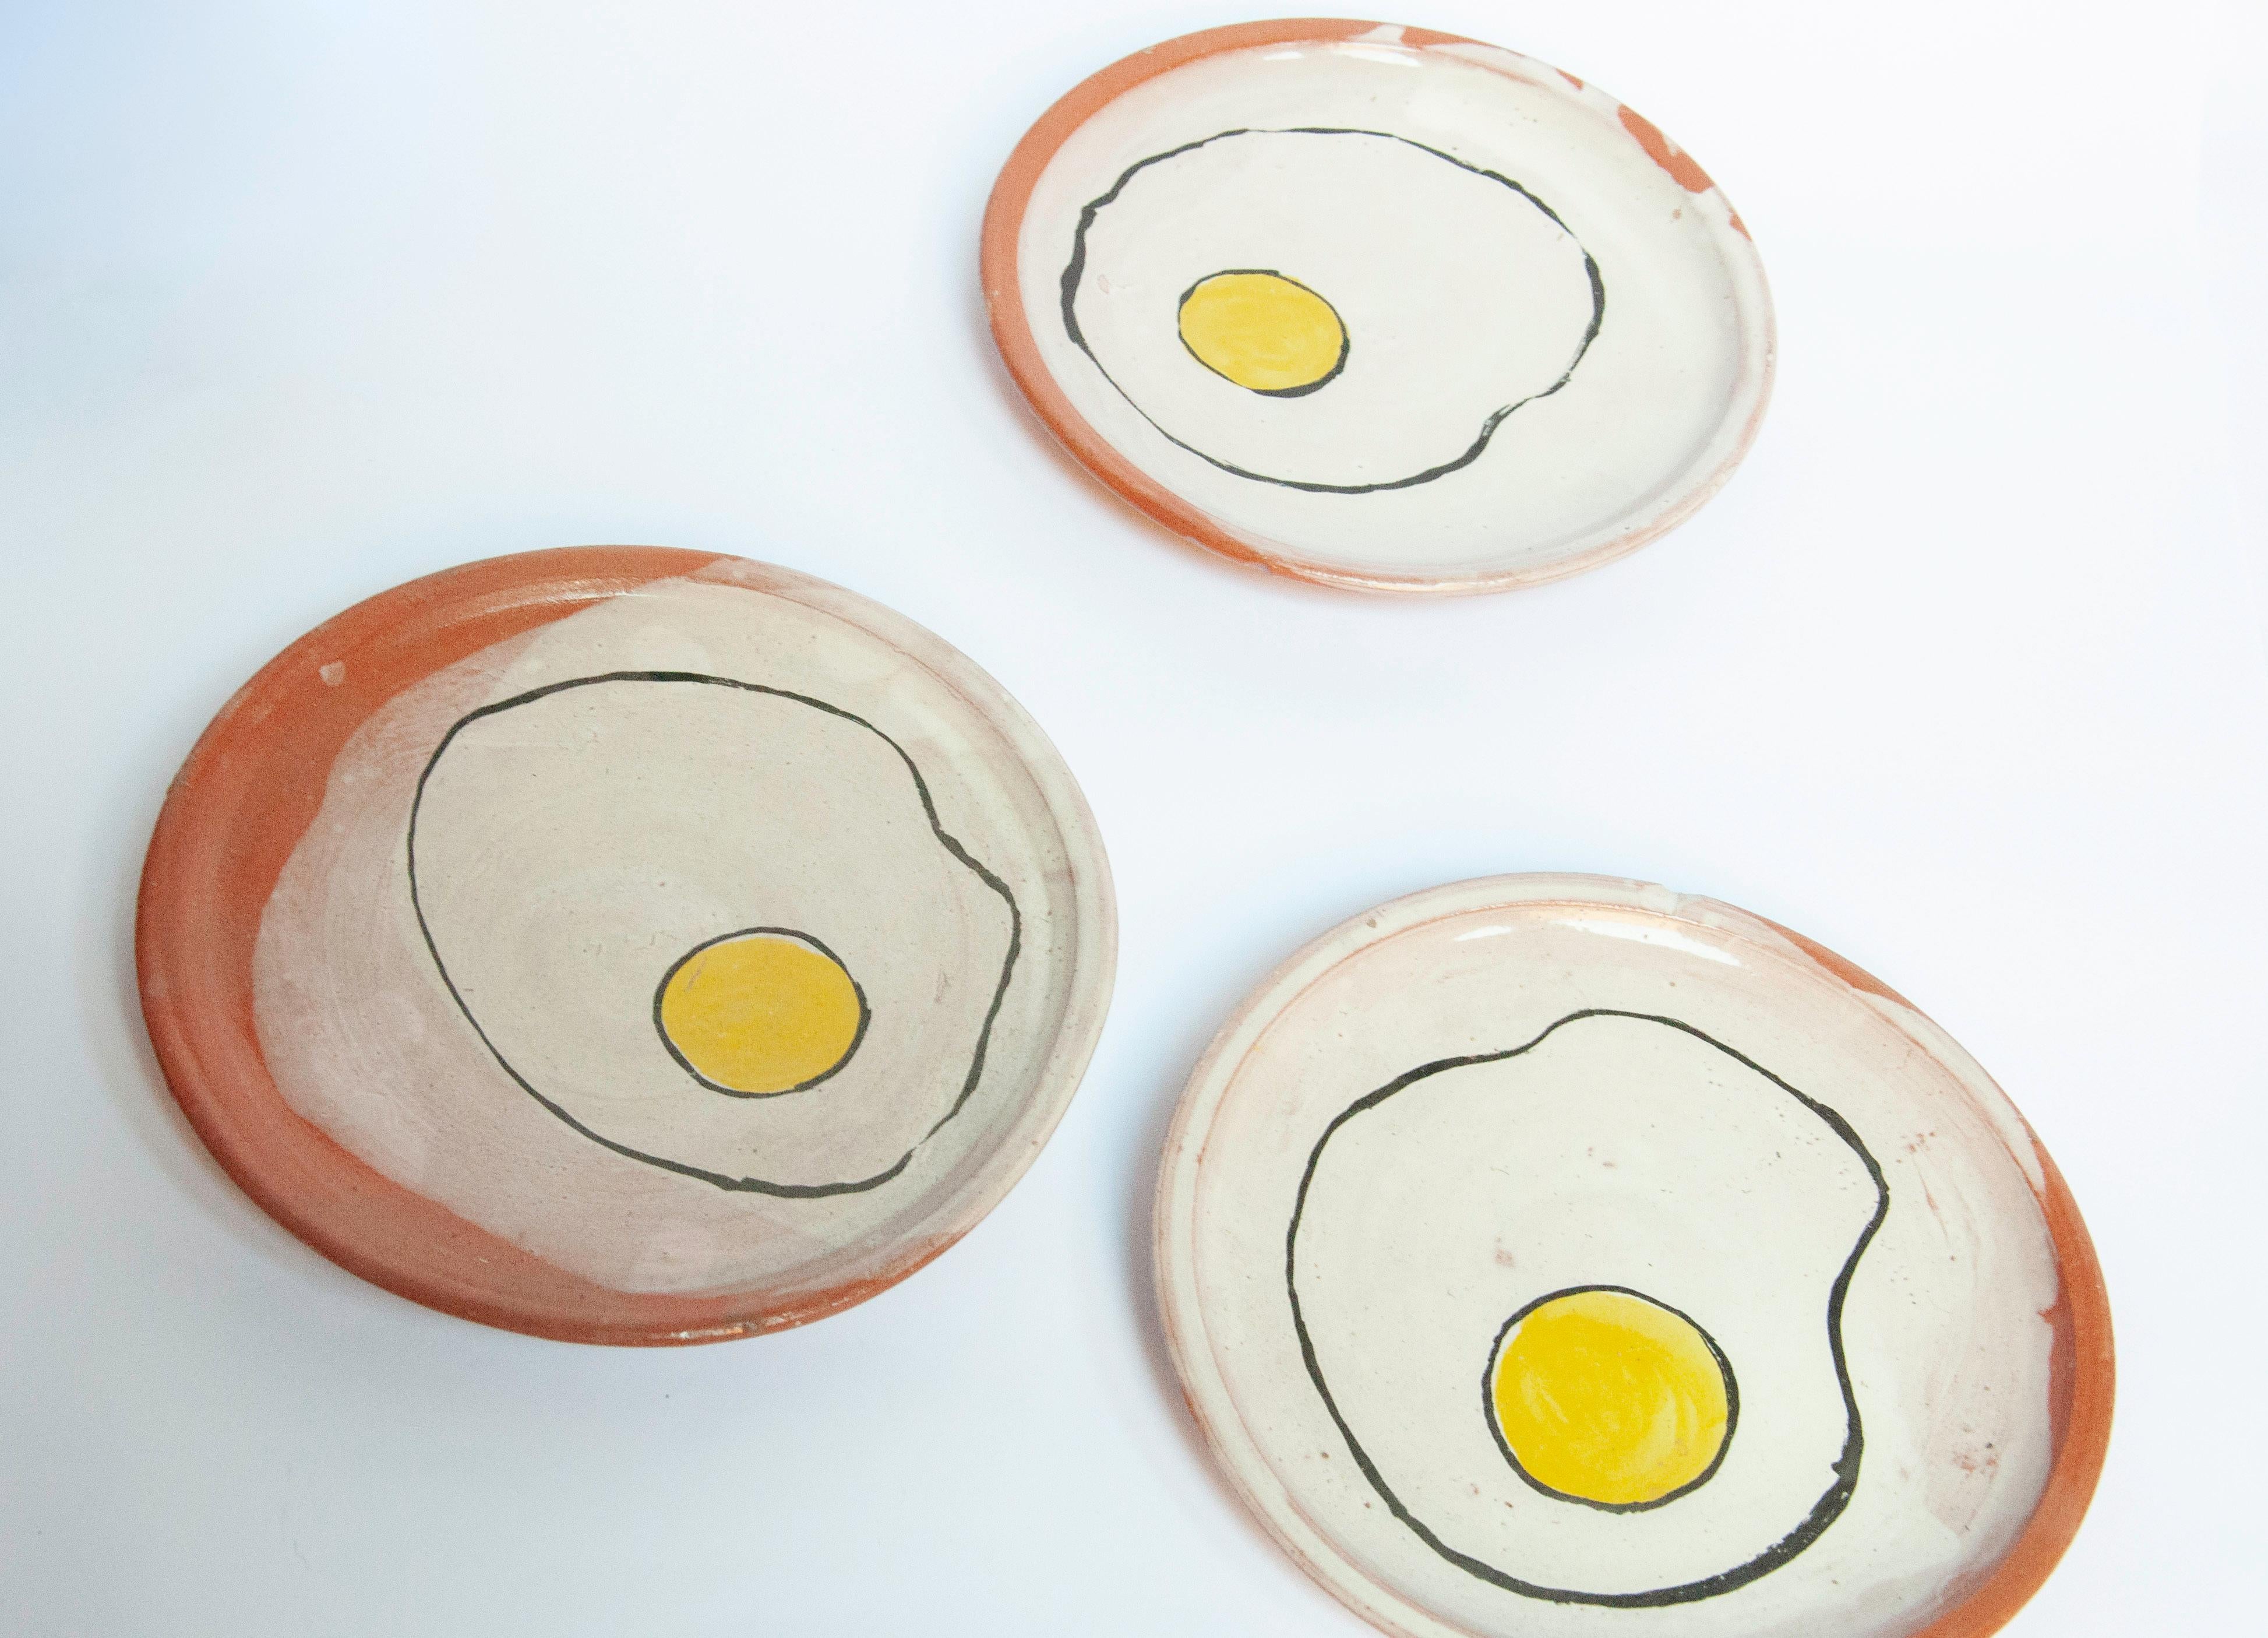 Ceramic 8 plate set with salt and pepper cart made in modern egg design by Lorenzo Lorenzzo

Lorenzo's work alludes to his favourite meal, breakfast, creating a contemporary design for this plate collection.